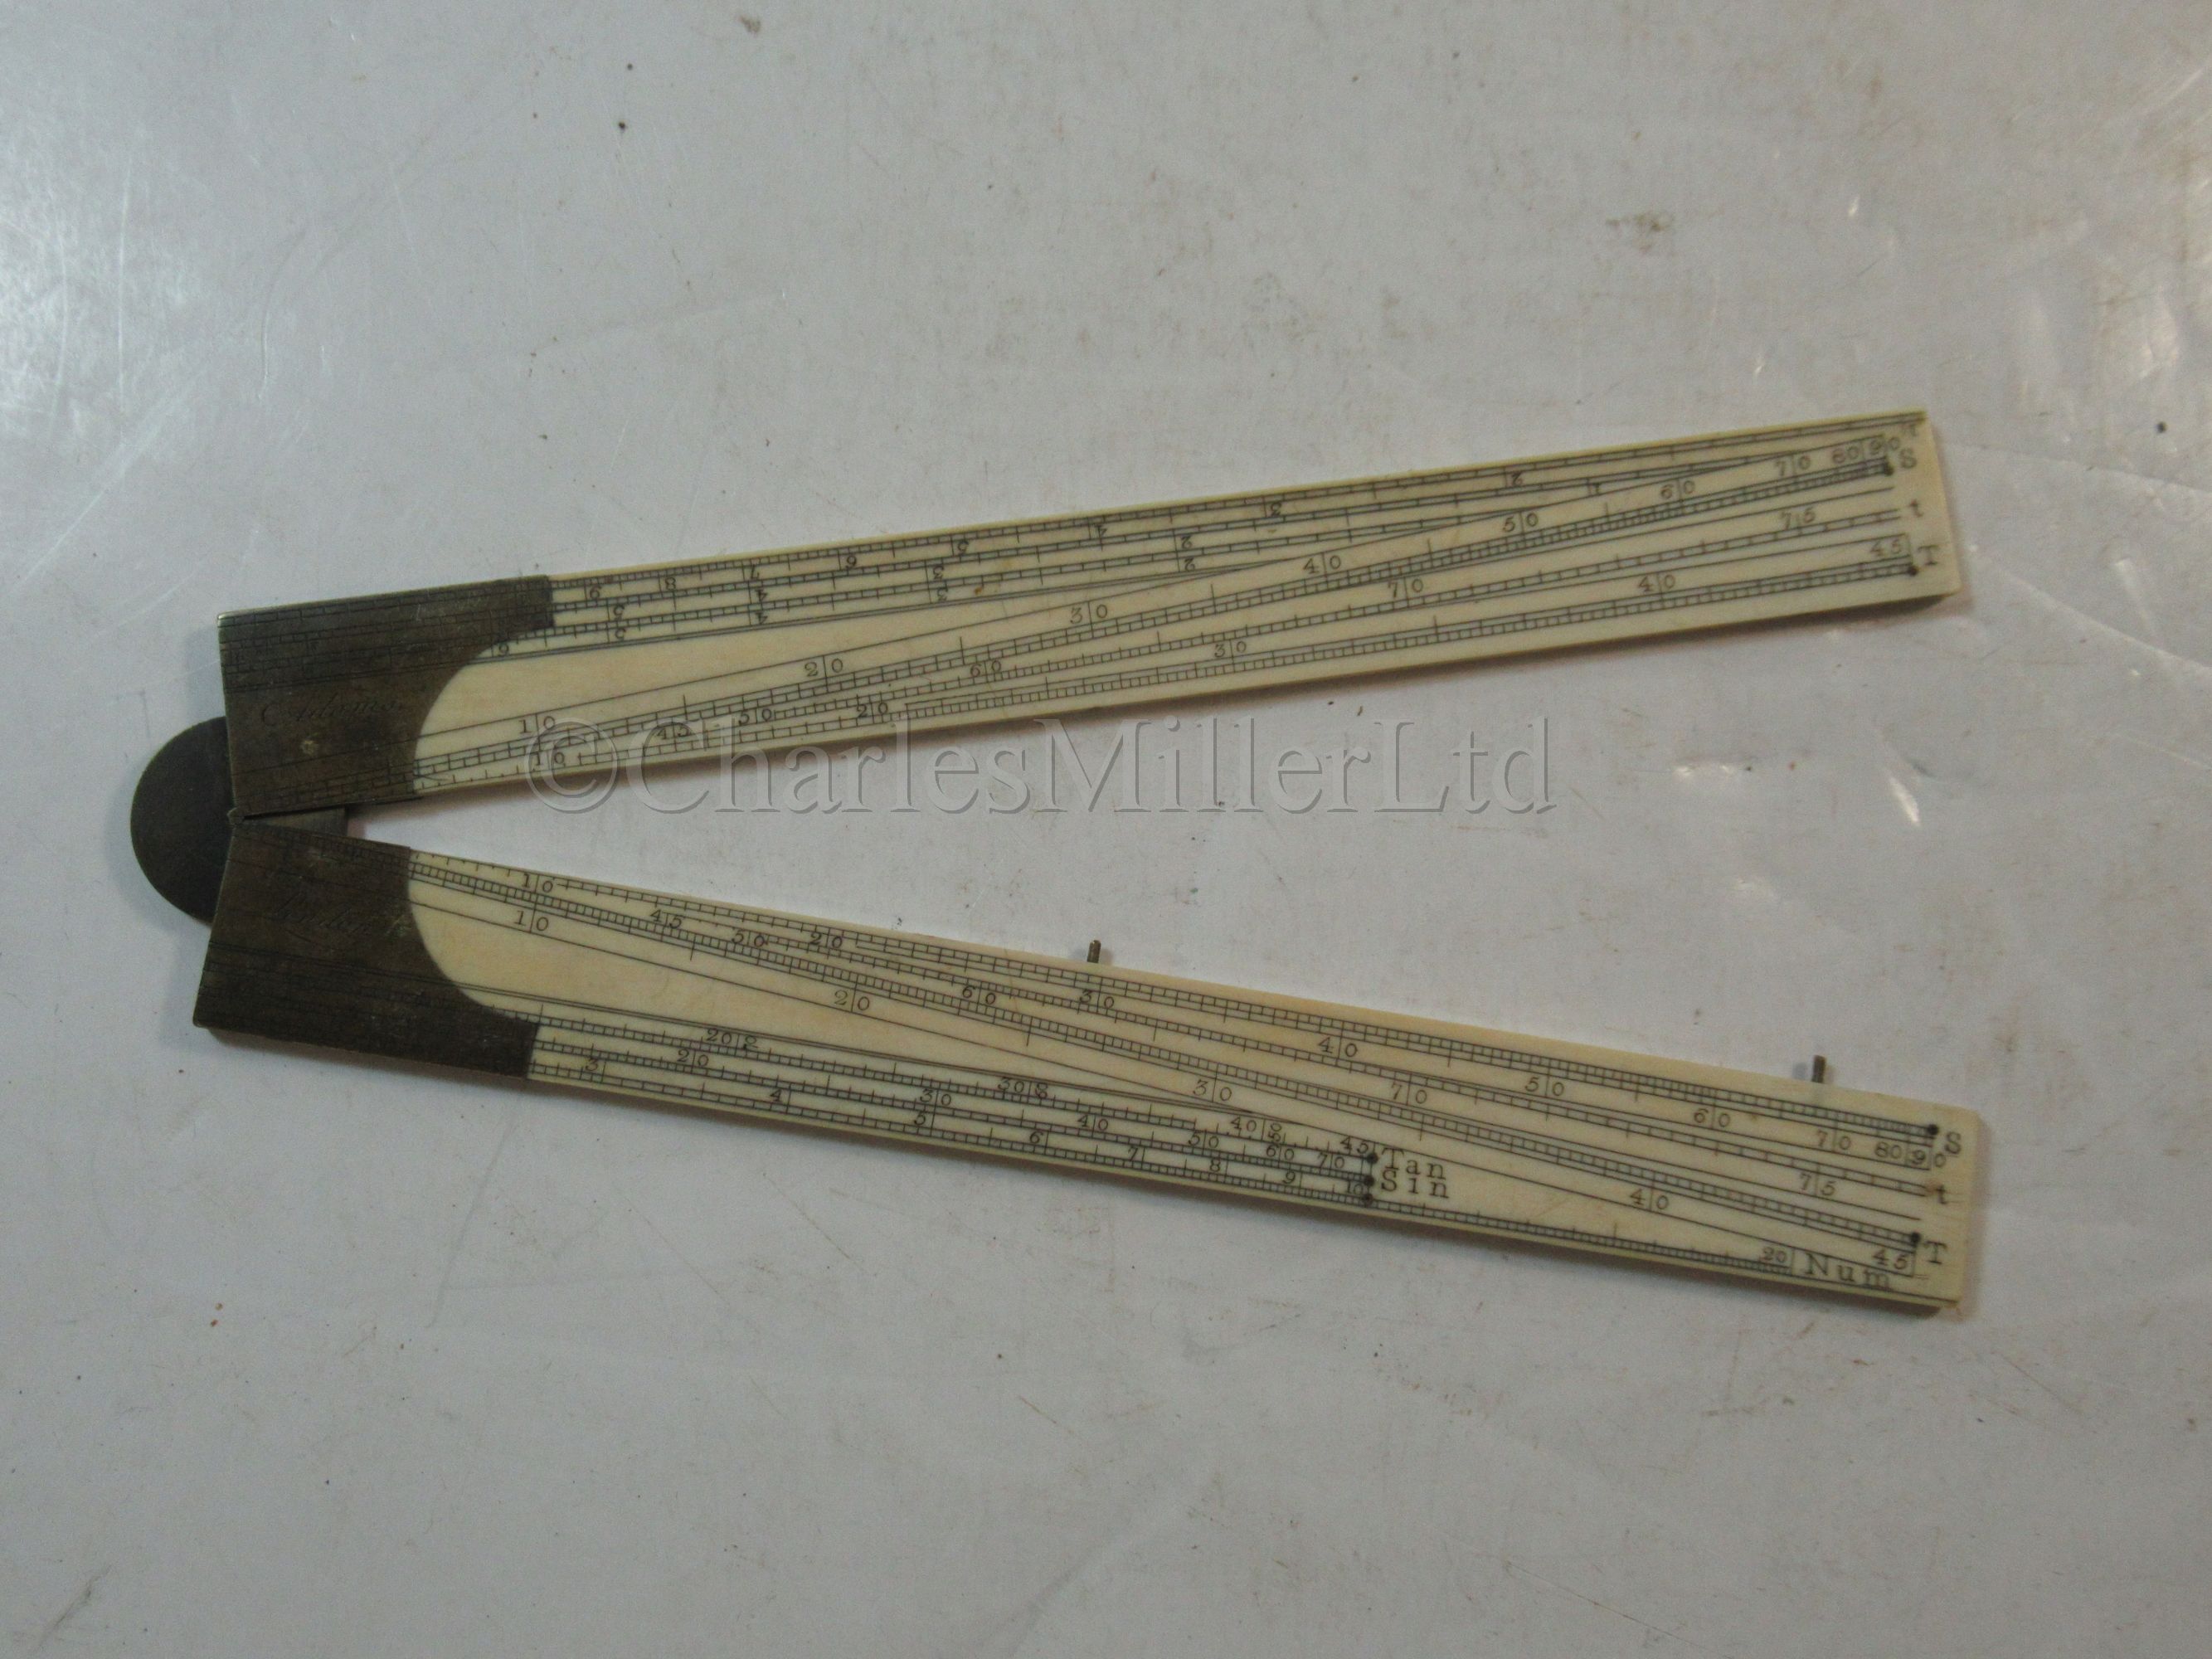 Ø A FOLDING IVORY AND BRASS SECTOR BY ADAMS, LONDON, CIRCA 1790 & 4 protractors - Image 6 of 9